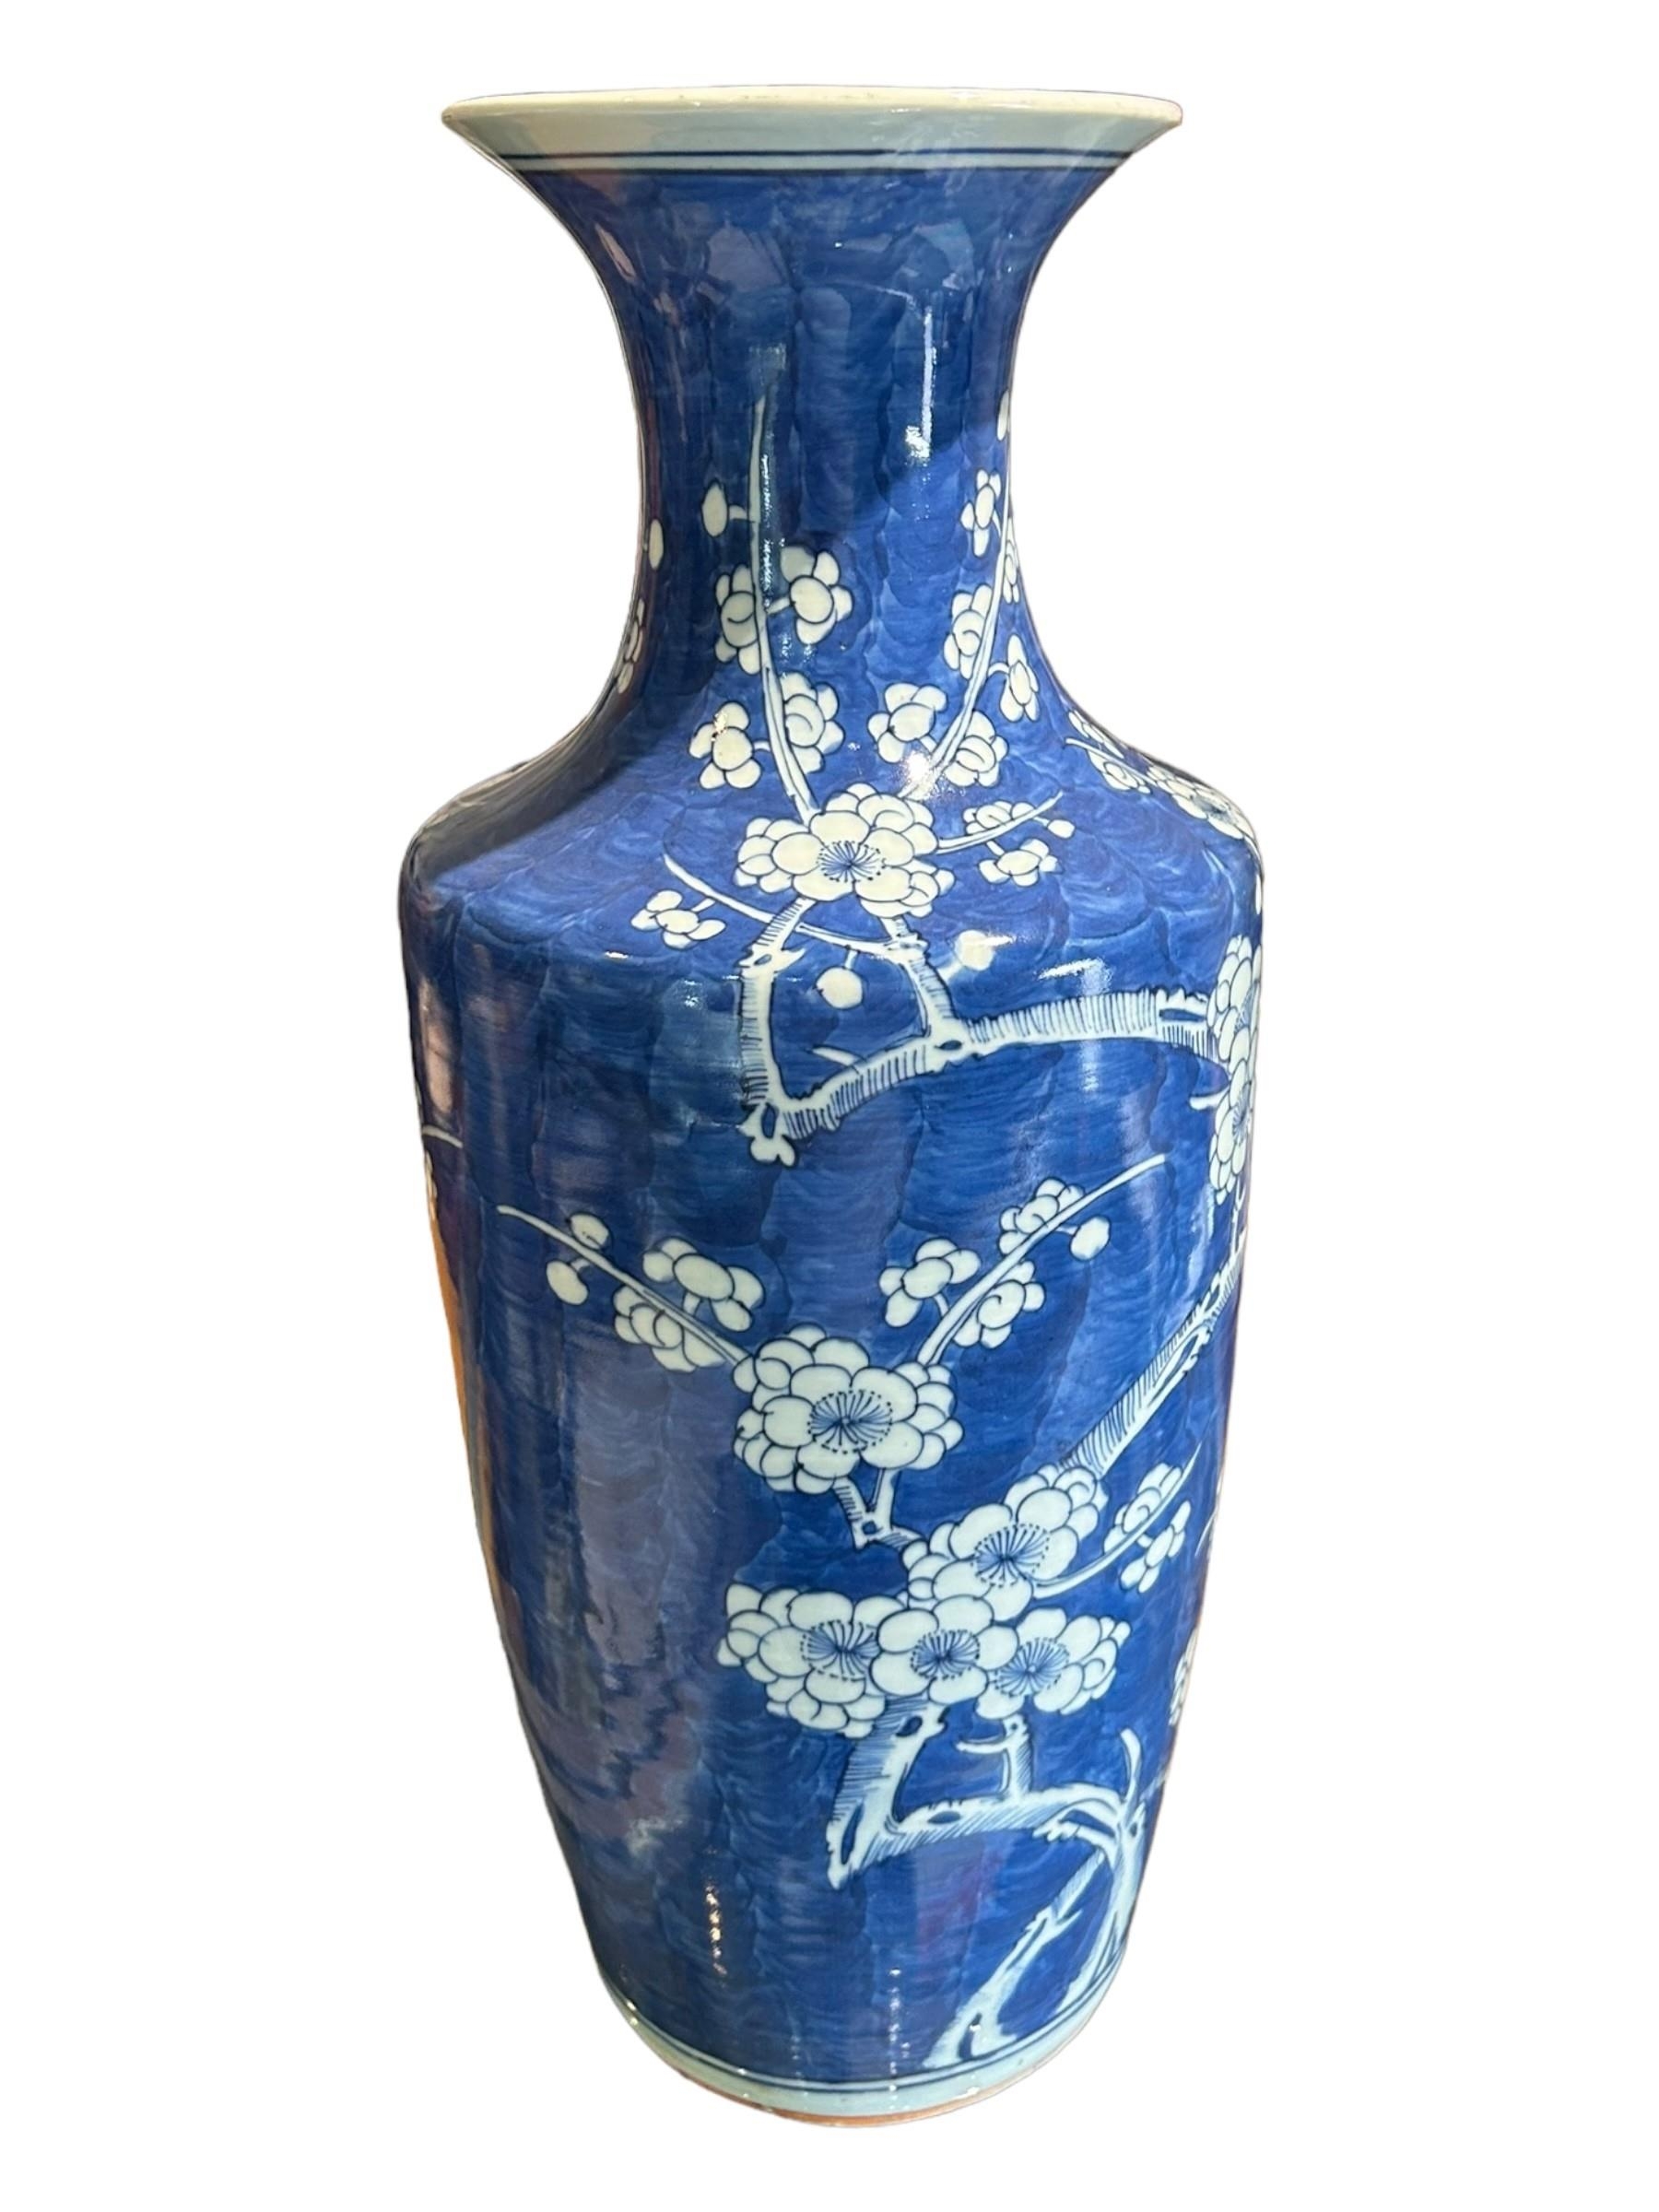 A LARGE CHINESE BLUE AND WHITE PRUNUS BLOSSOM BALUSTER VASE. (h 44cm x d 18.5cm) - Image 4 of 6